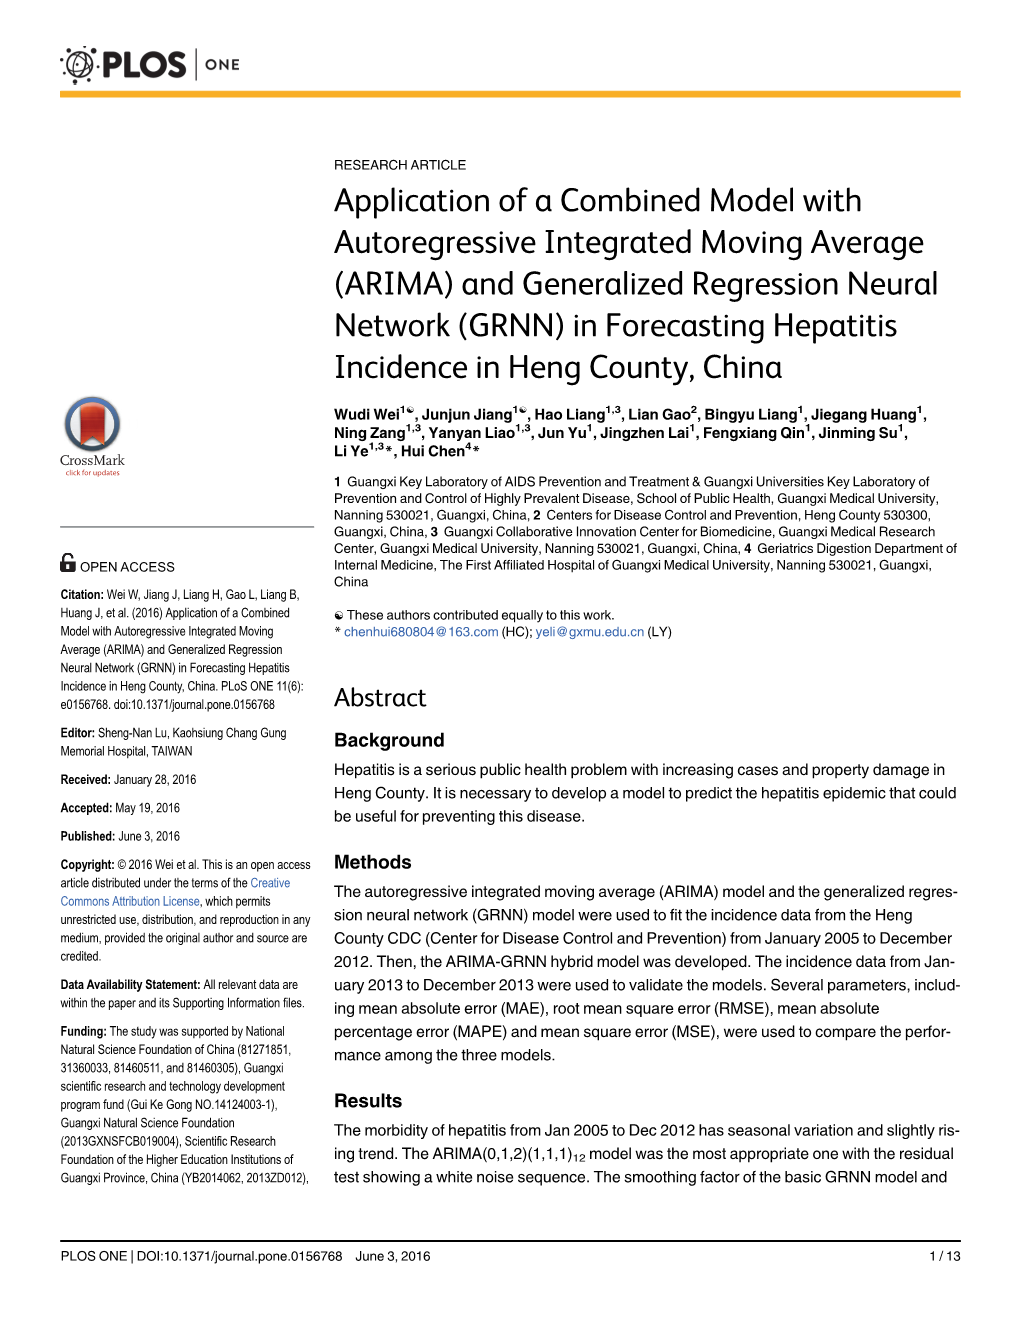 Application of a Combined Model with Autoregressive Integrated Moving Average (ARIMA) and Generalized Regression Neural Network (GRNN) in Forecasting Hepatitis Incidence in Heng